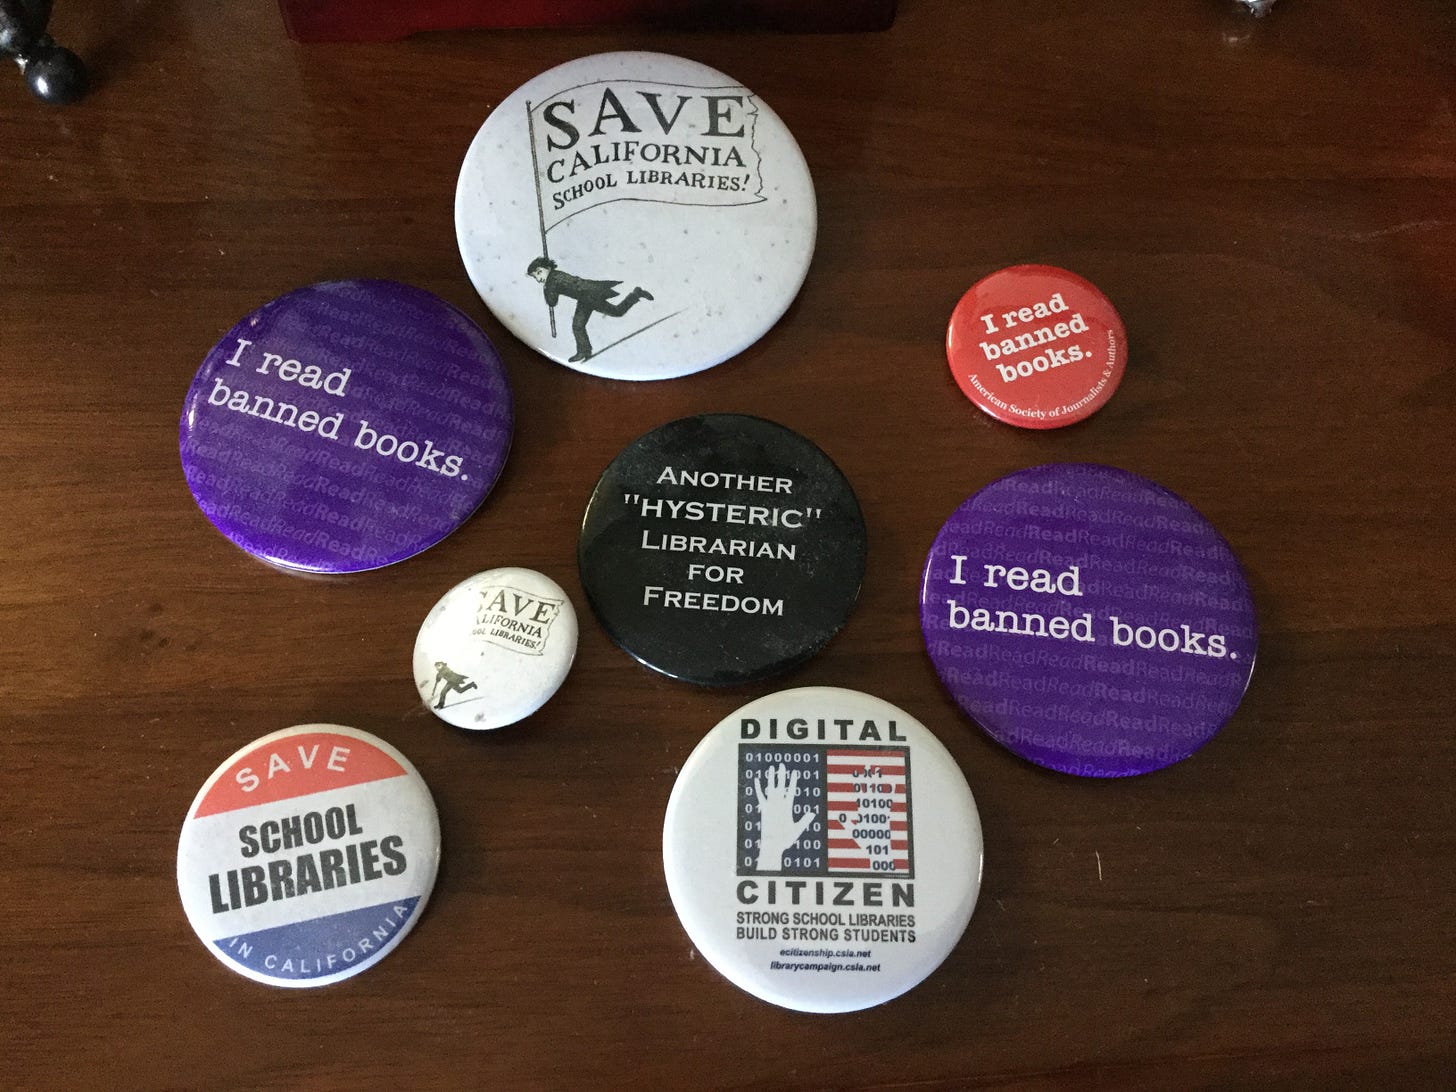 Some buttons with the “I read banned books” slogan.